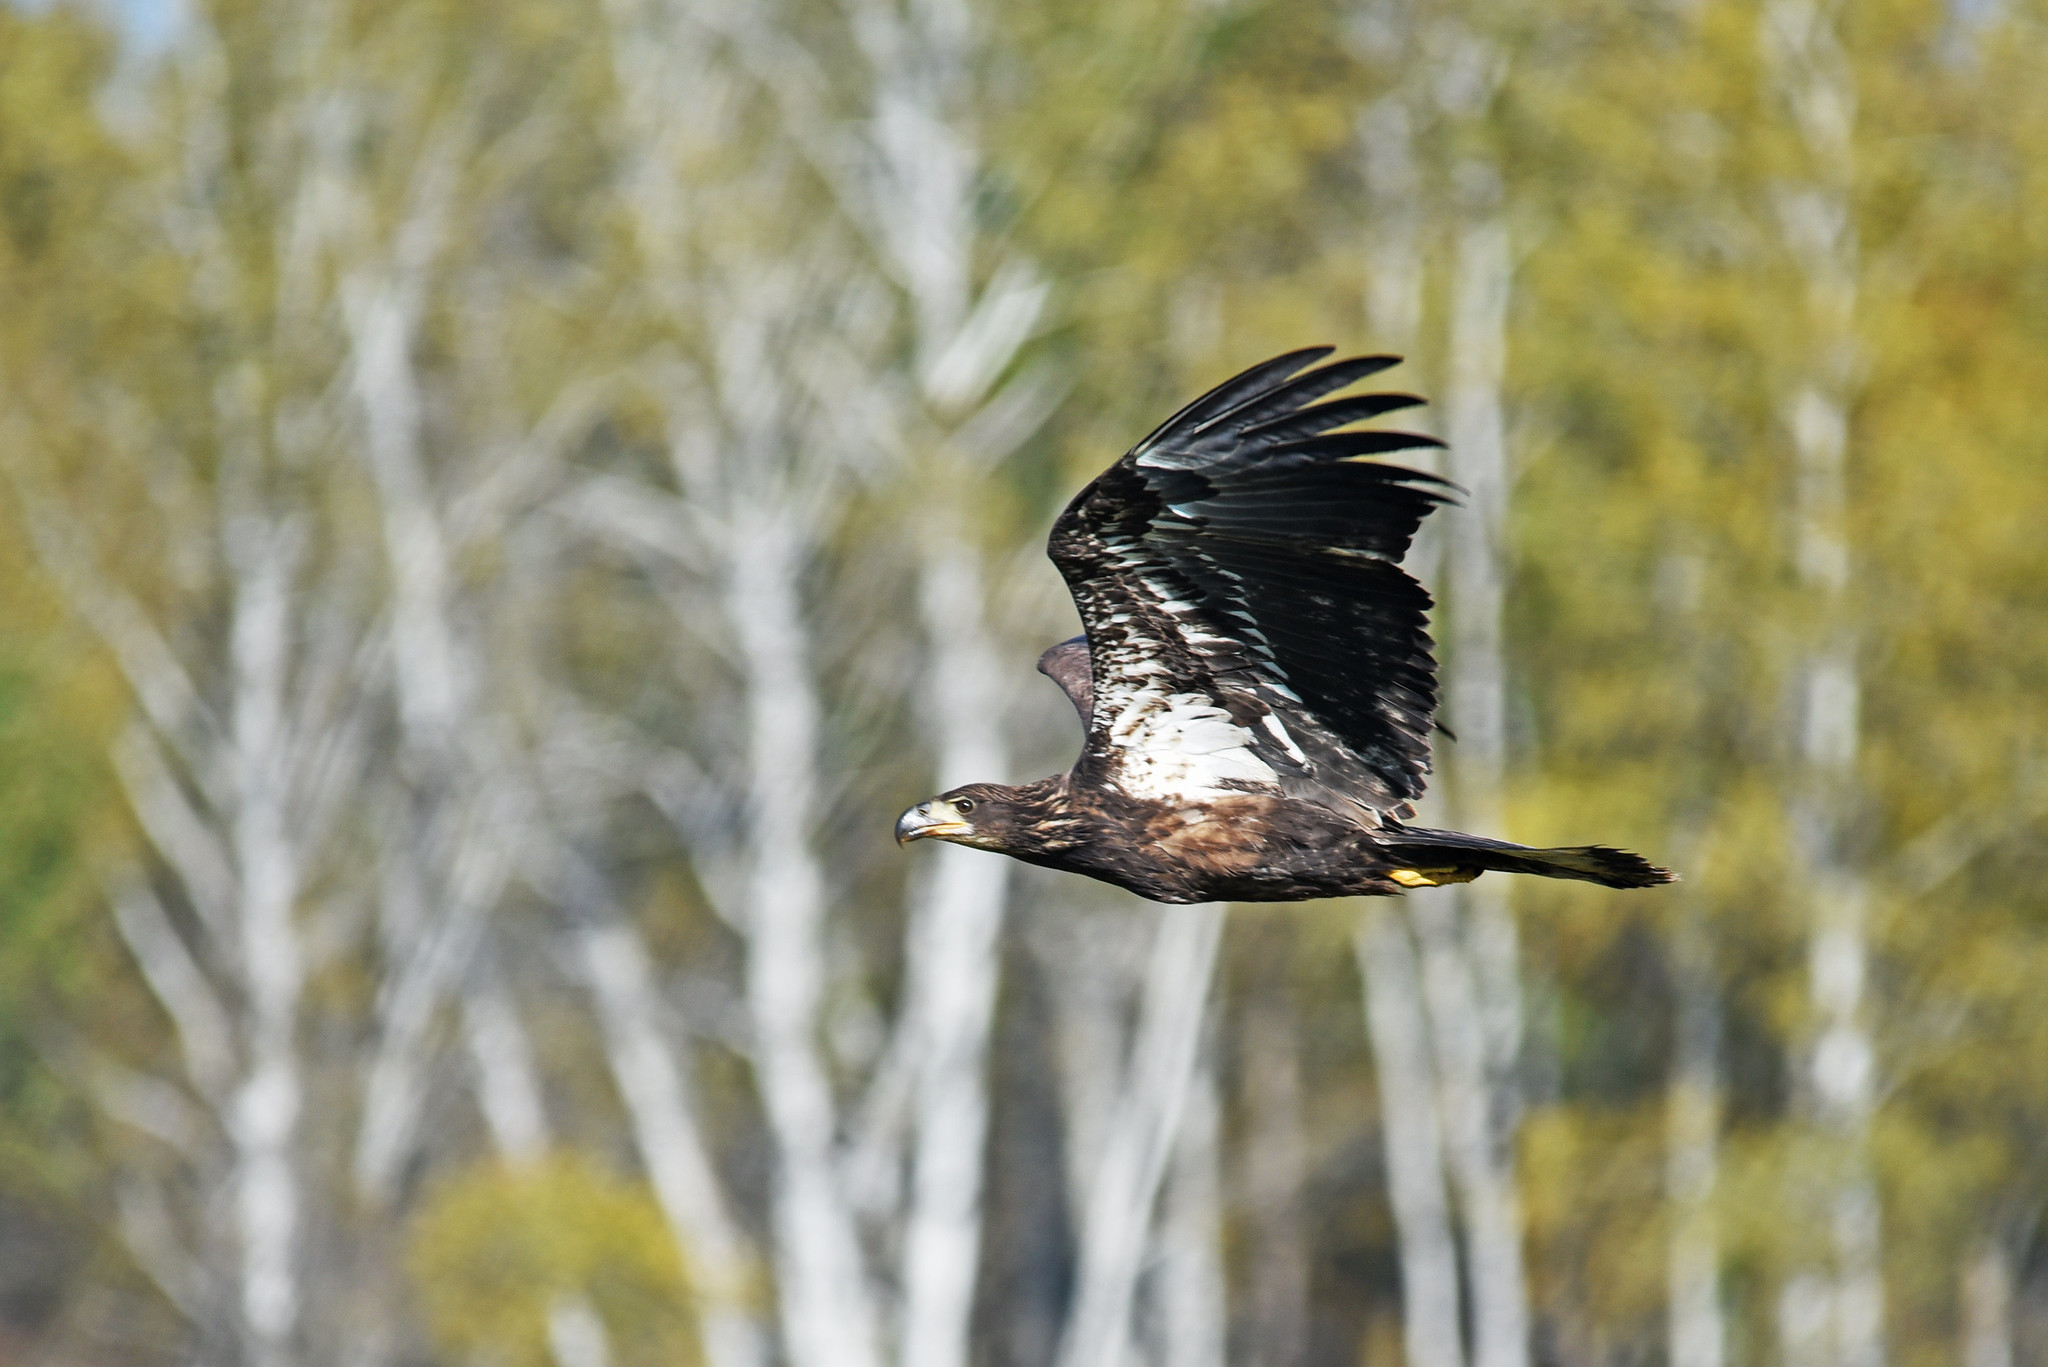 A juvenile bald eagle in flight, heading from left to right, with ttrees blurry in the background.